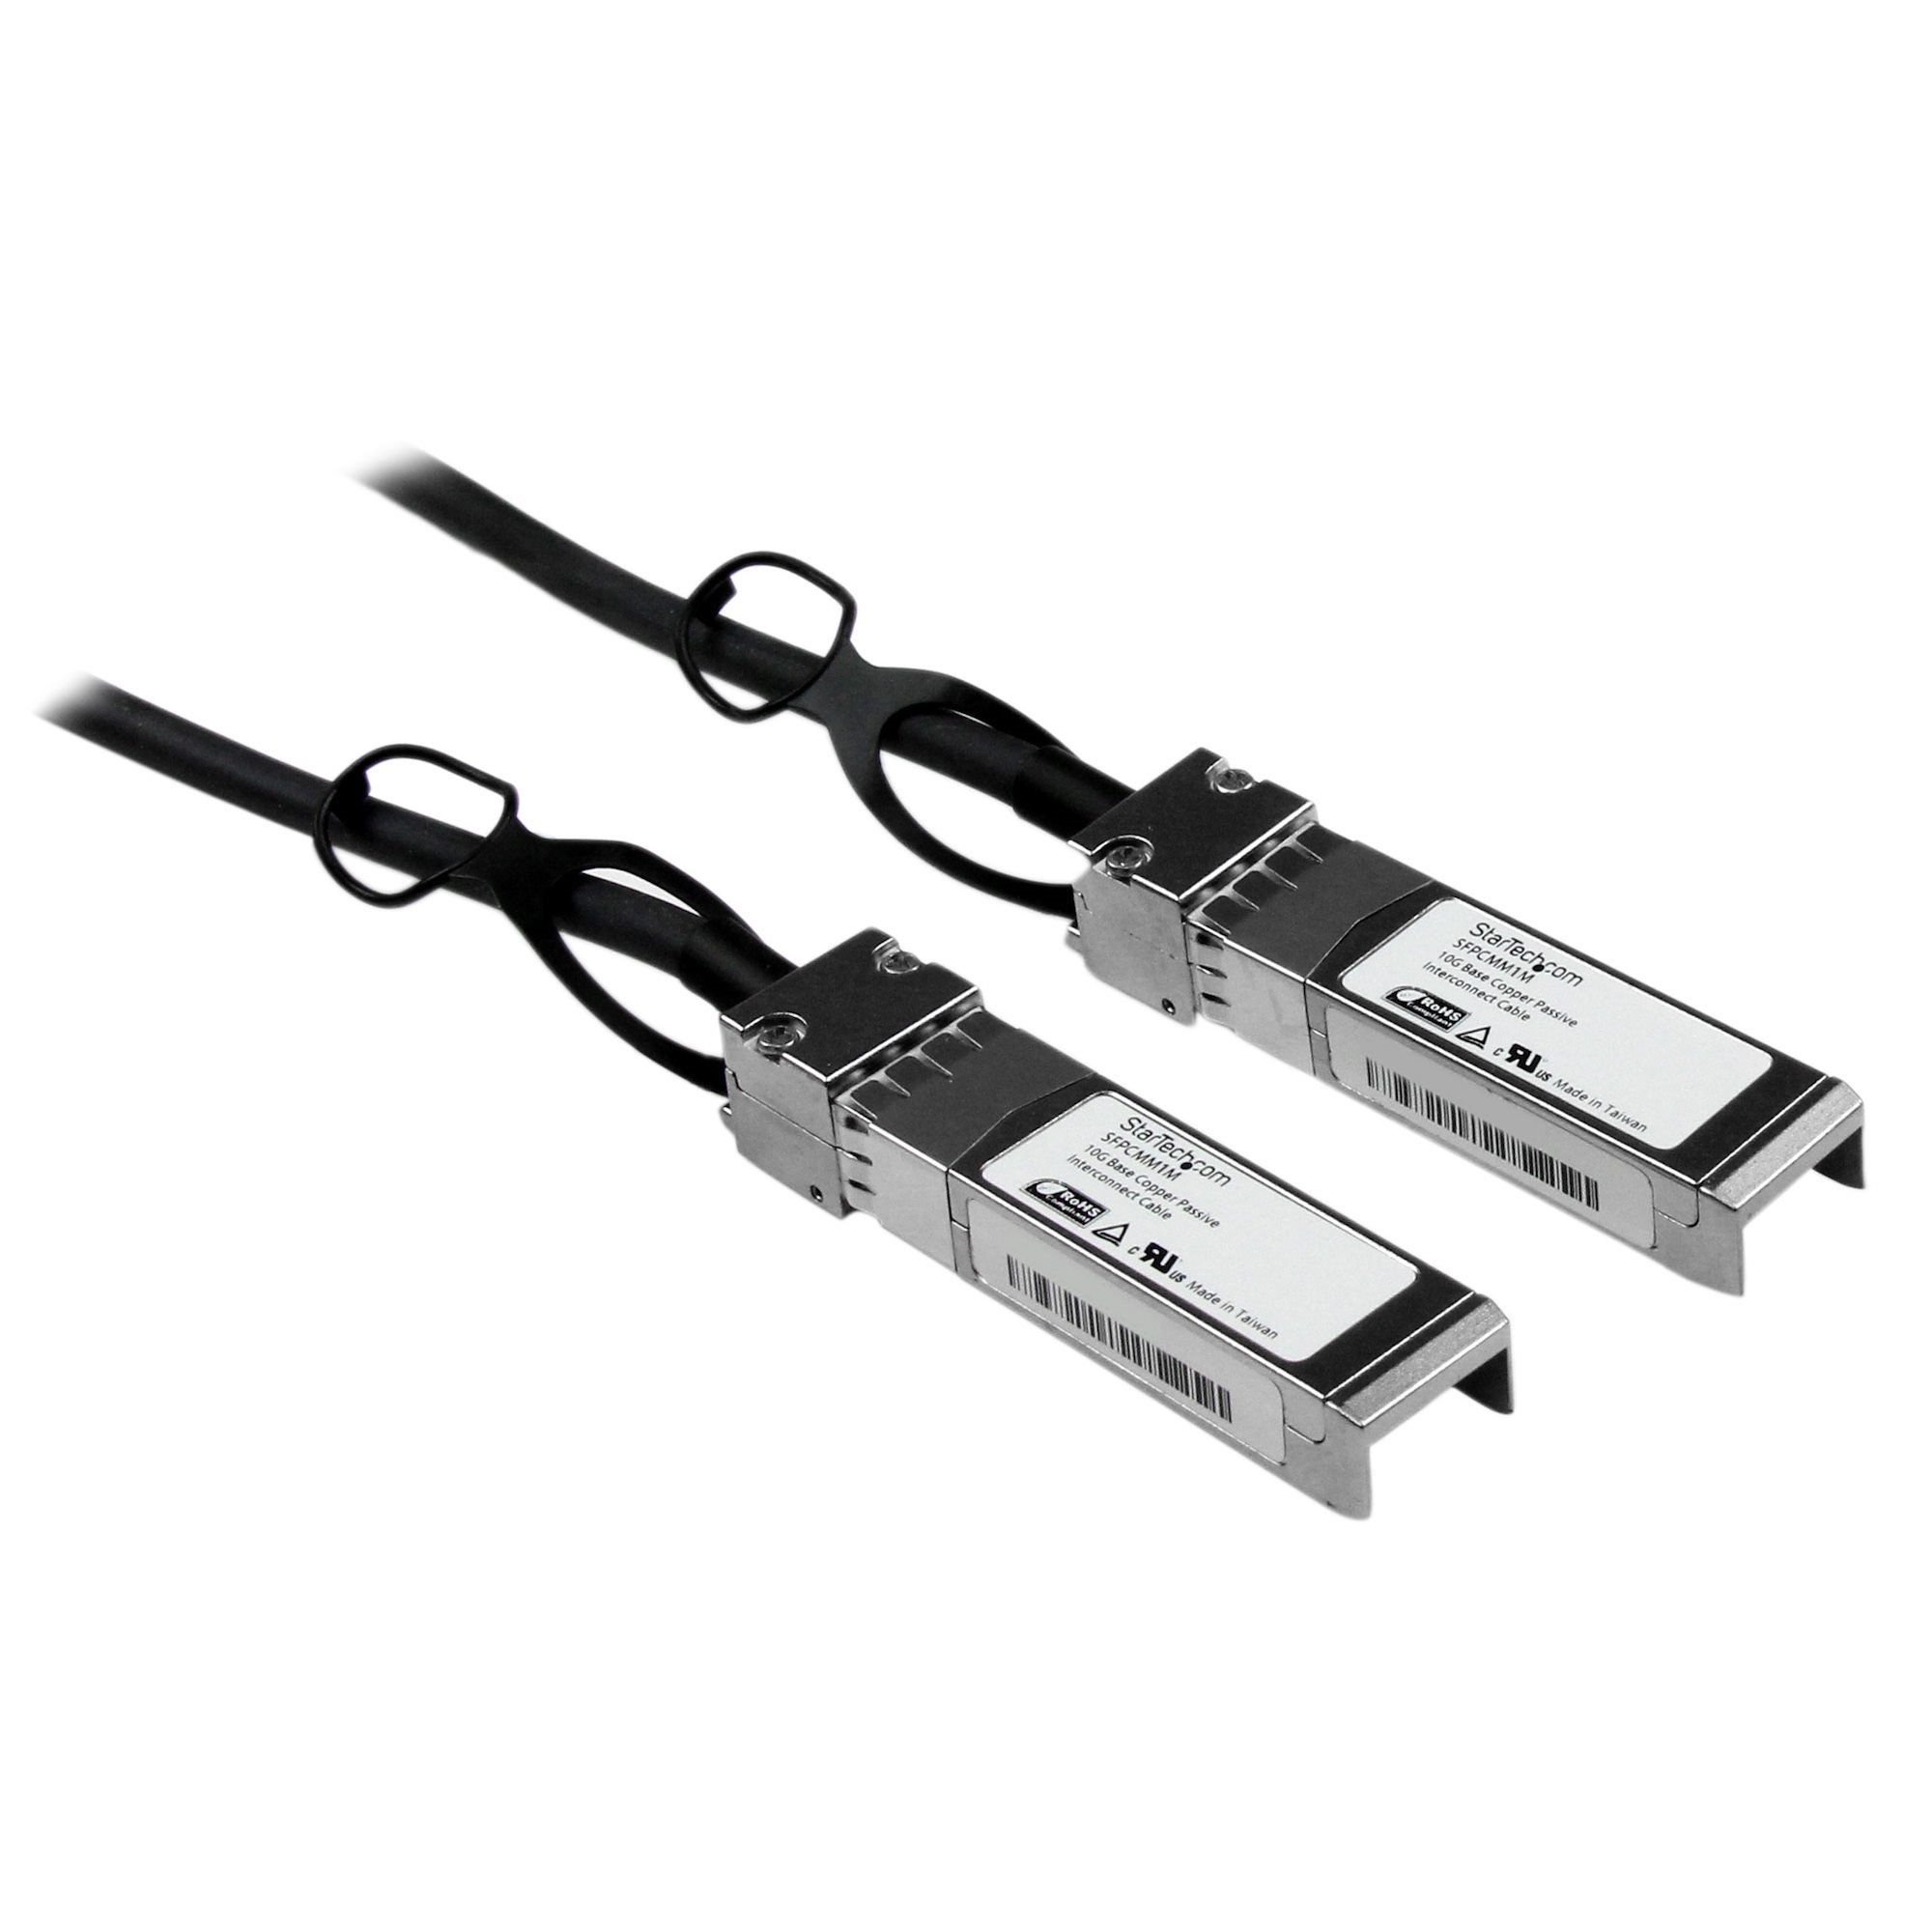 StarTech Cisco Compatible SFP+ 10GbE Cable (3m)